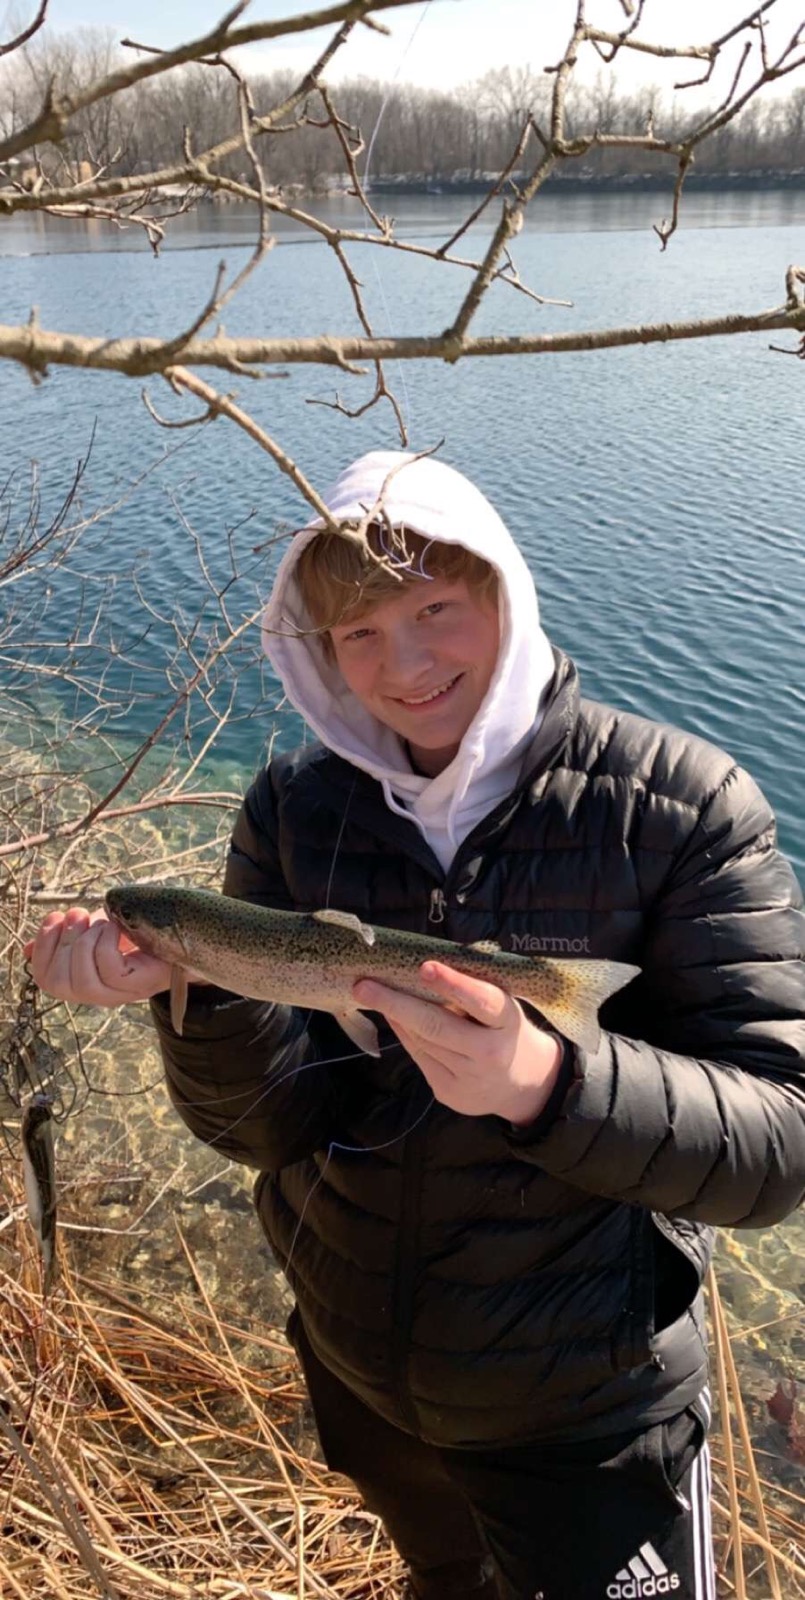 Maumee River Report- February 17, 2020